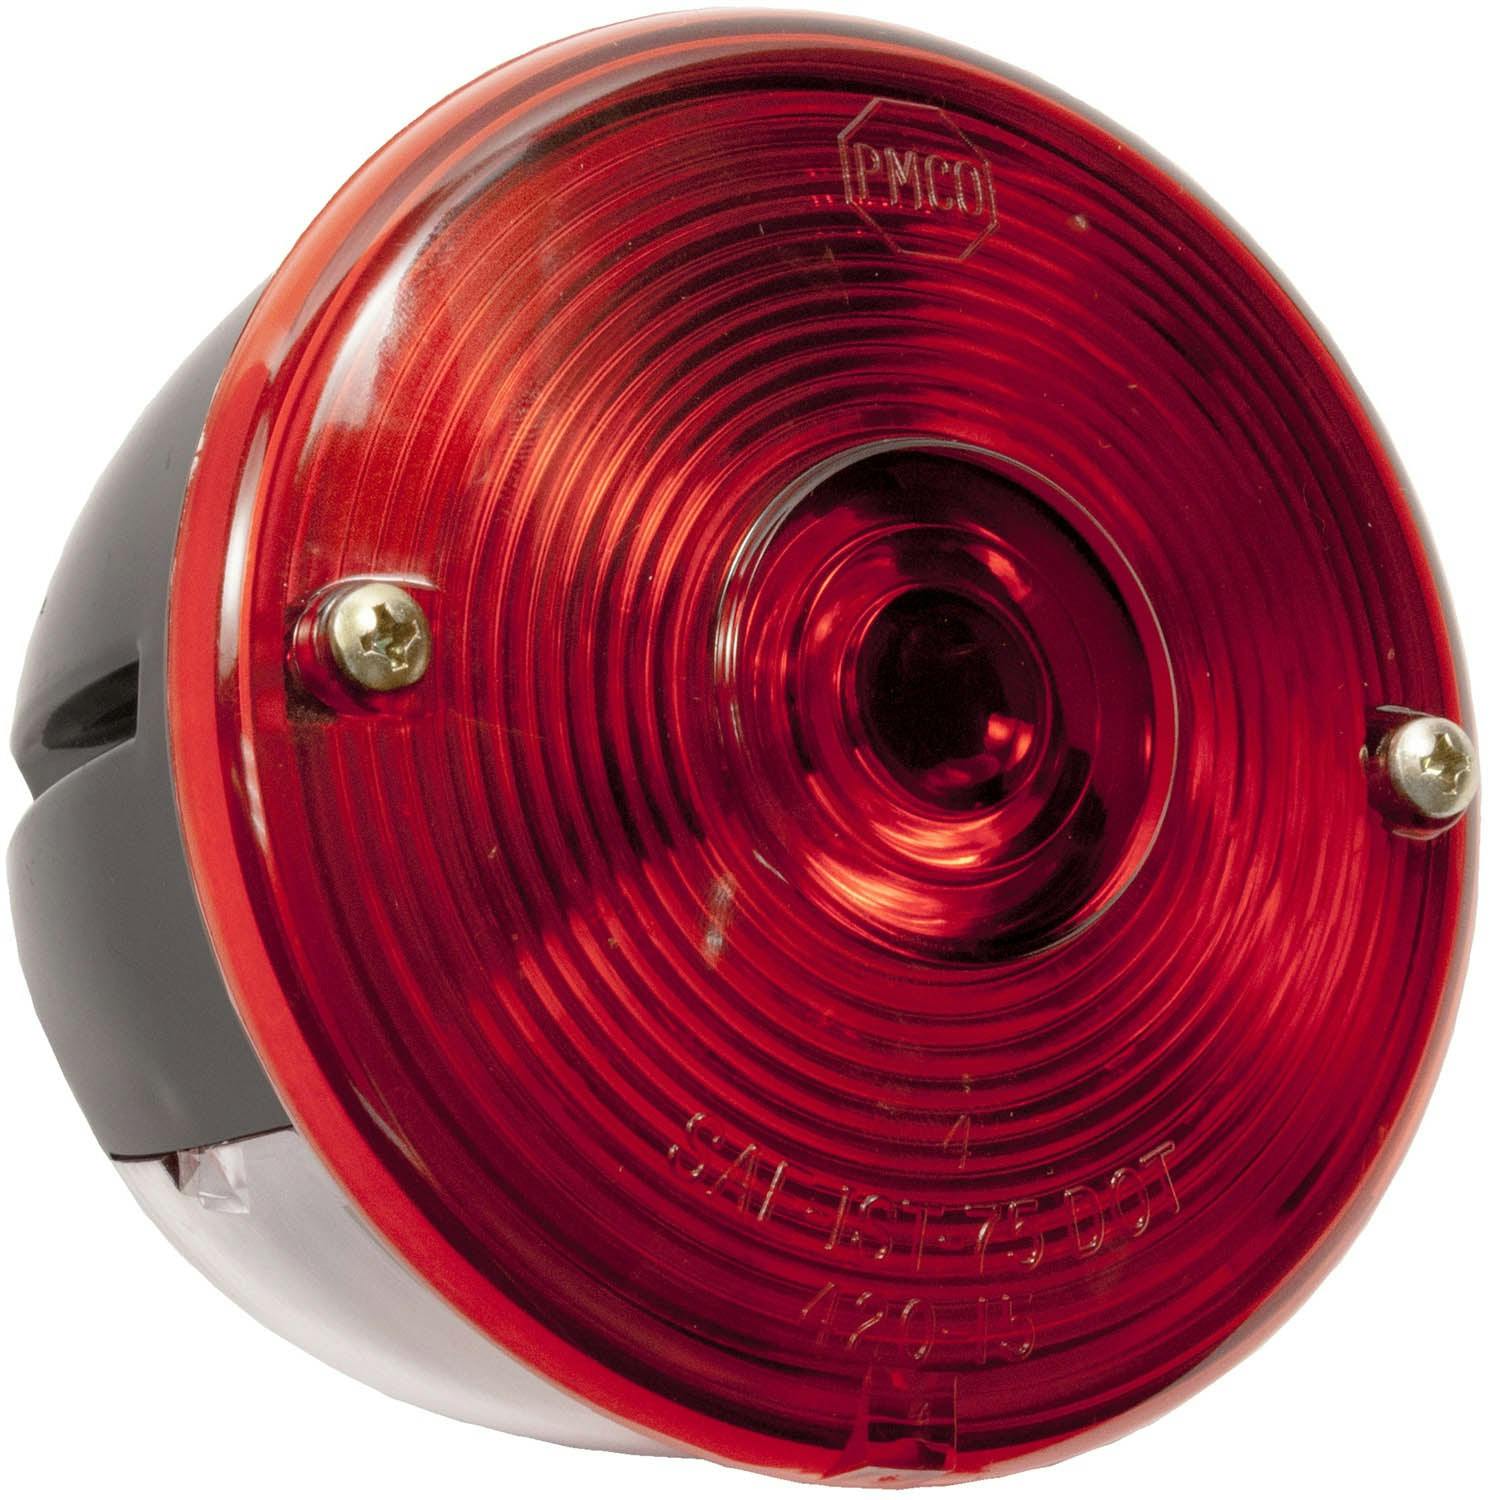 Incandescent Stop/Turn/Tail, Universal, Round, Stud-Mount, w/o-License Light, 3.75"X2.625", red (Pack of 6)